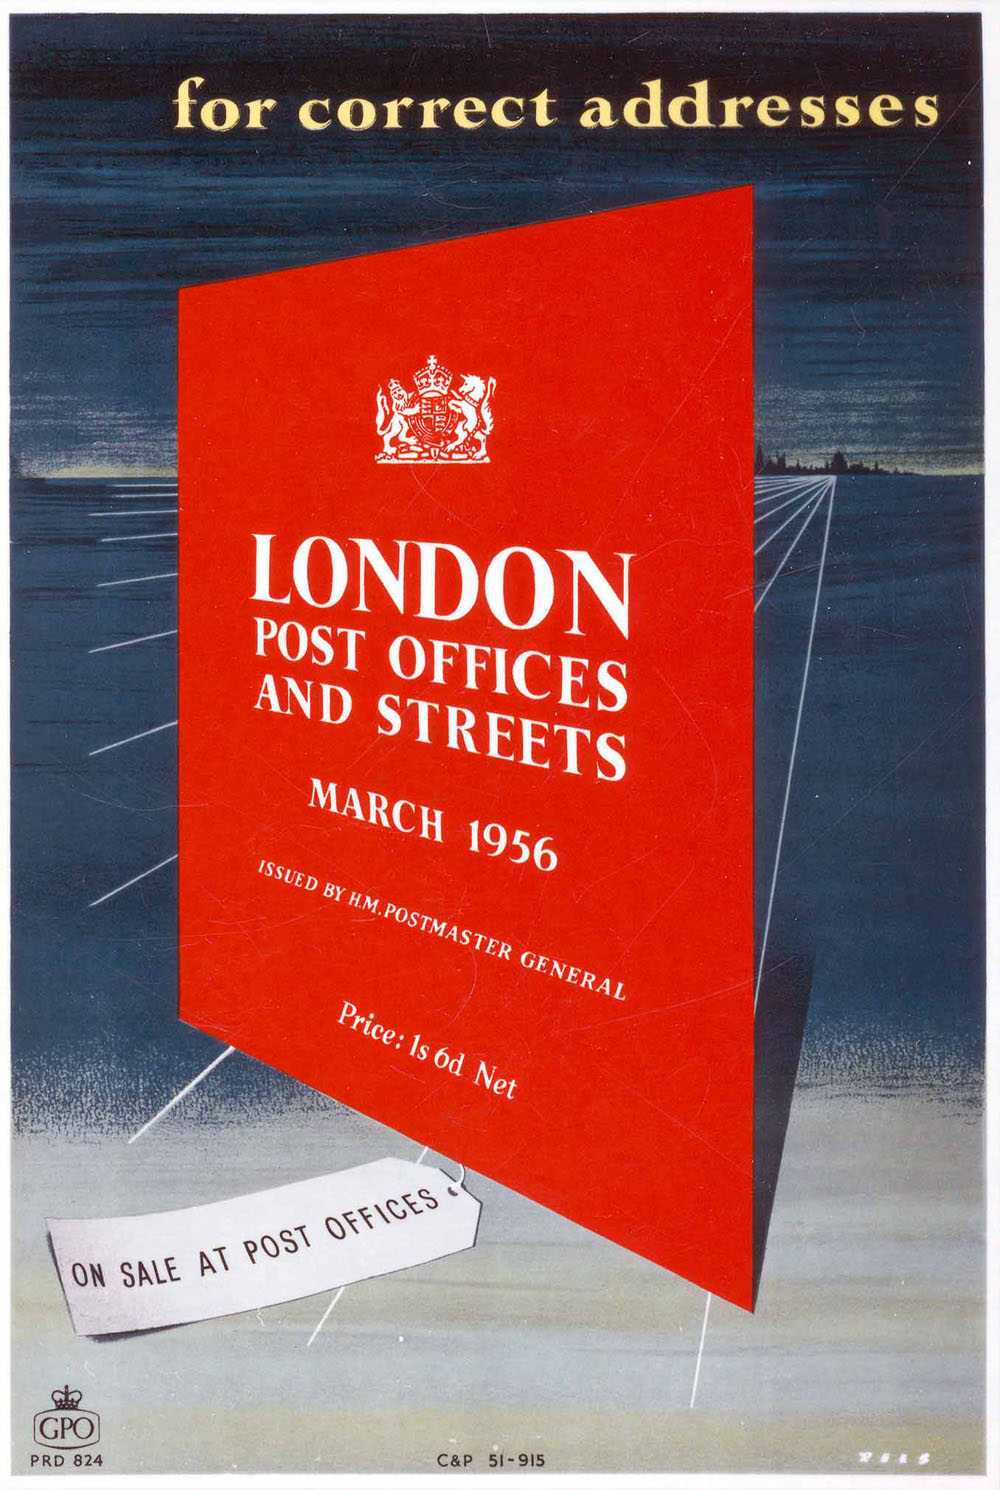 For correct addresses: London Post Offices and Streets, March 1956